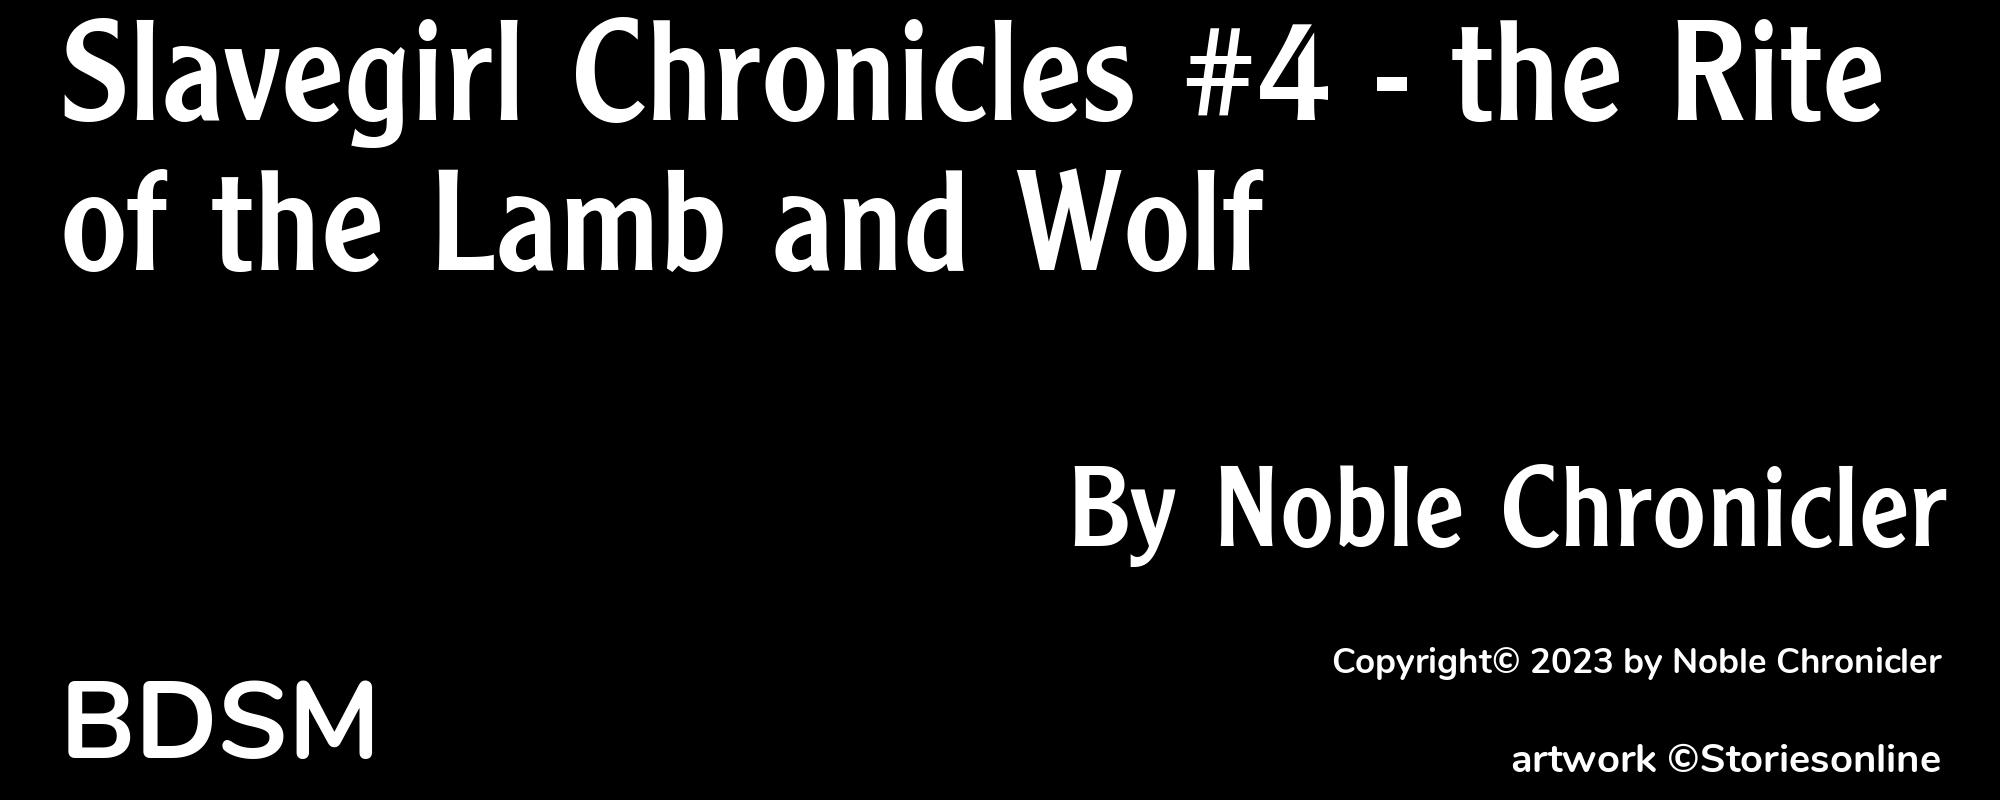 Slavegirl Chronicles #4 - the Rite of the Lamb and Wolf - Cover